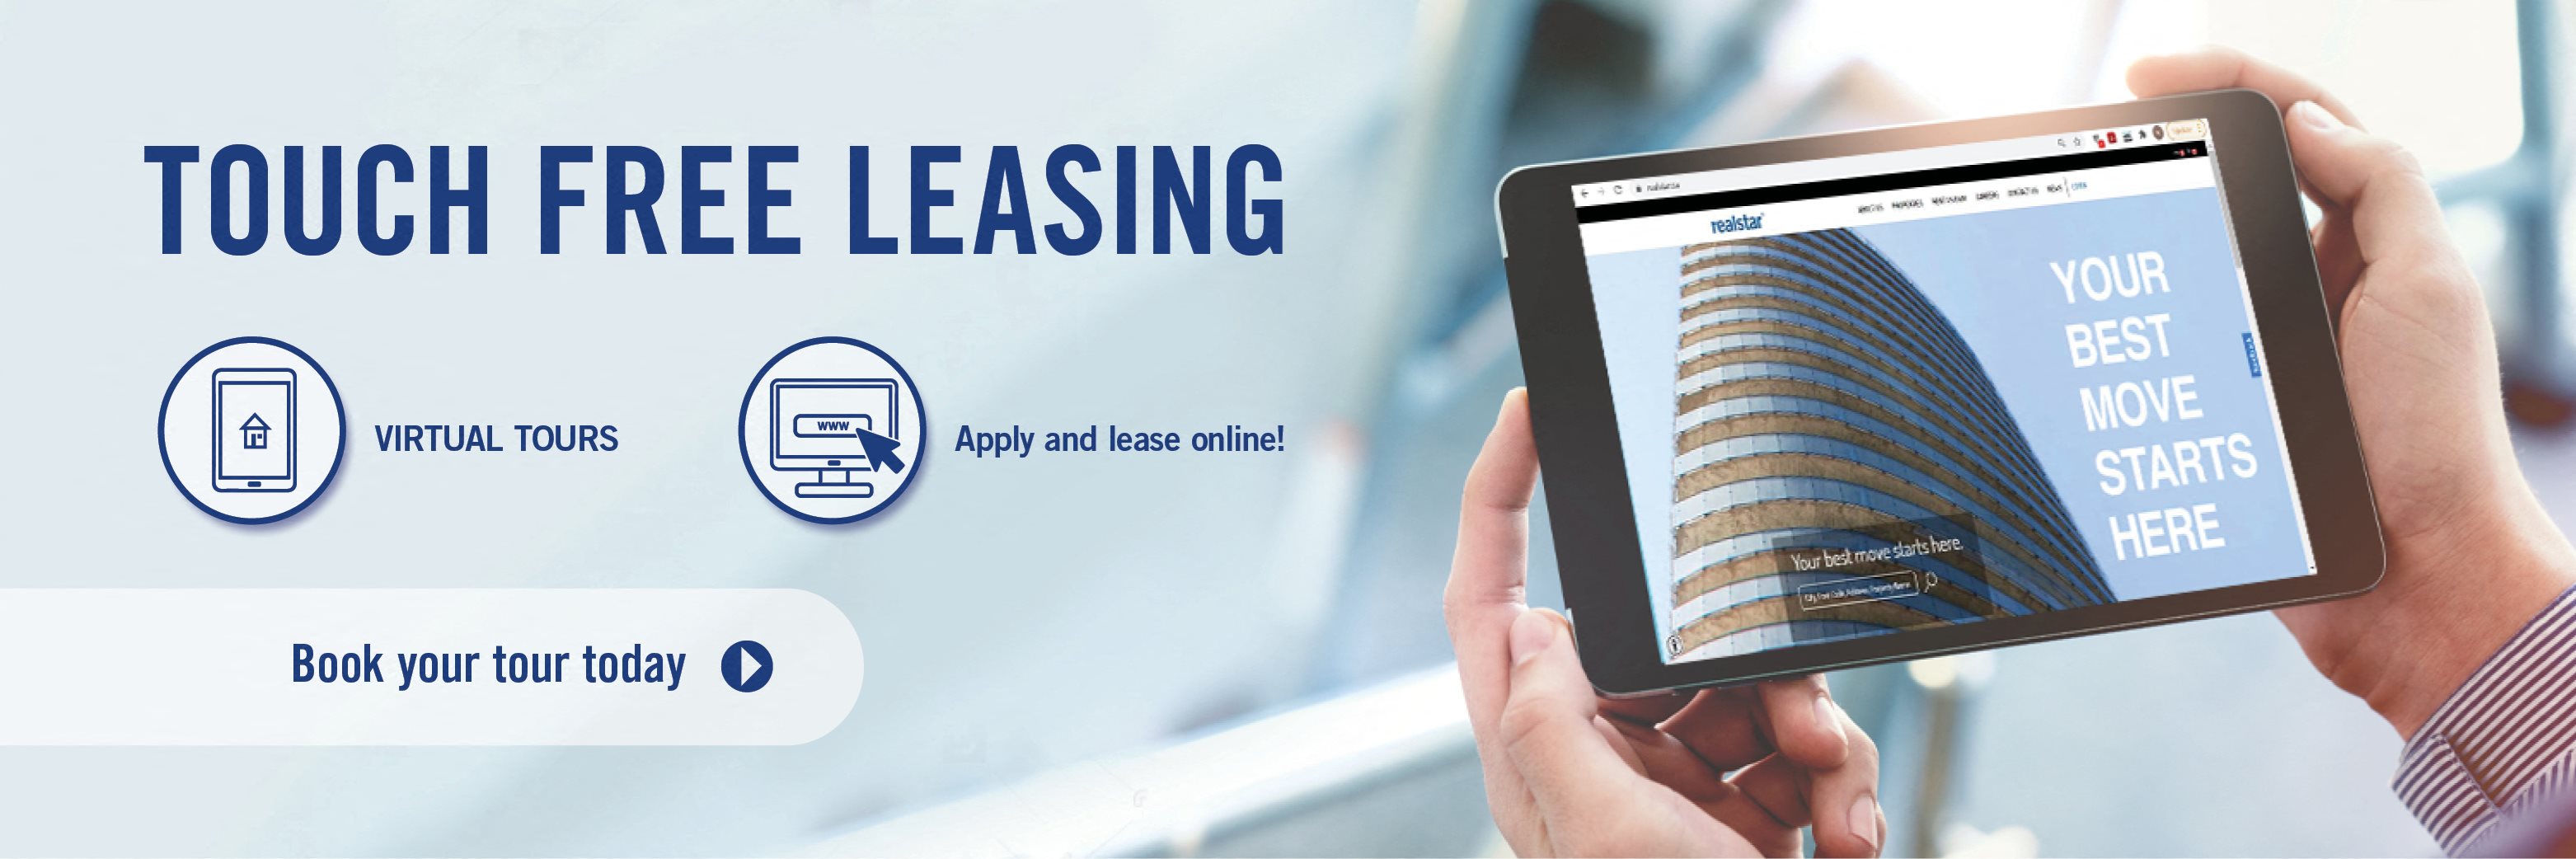 Now Offering Touch Free Leasing